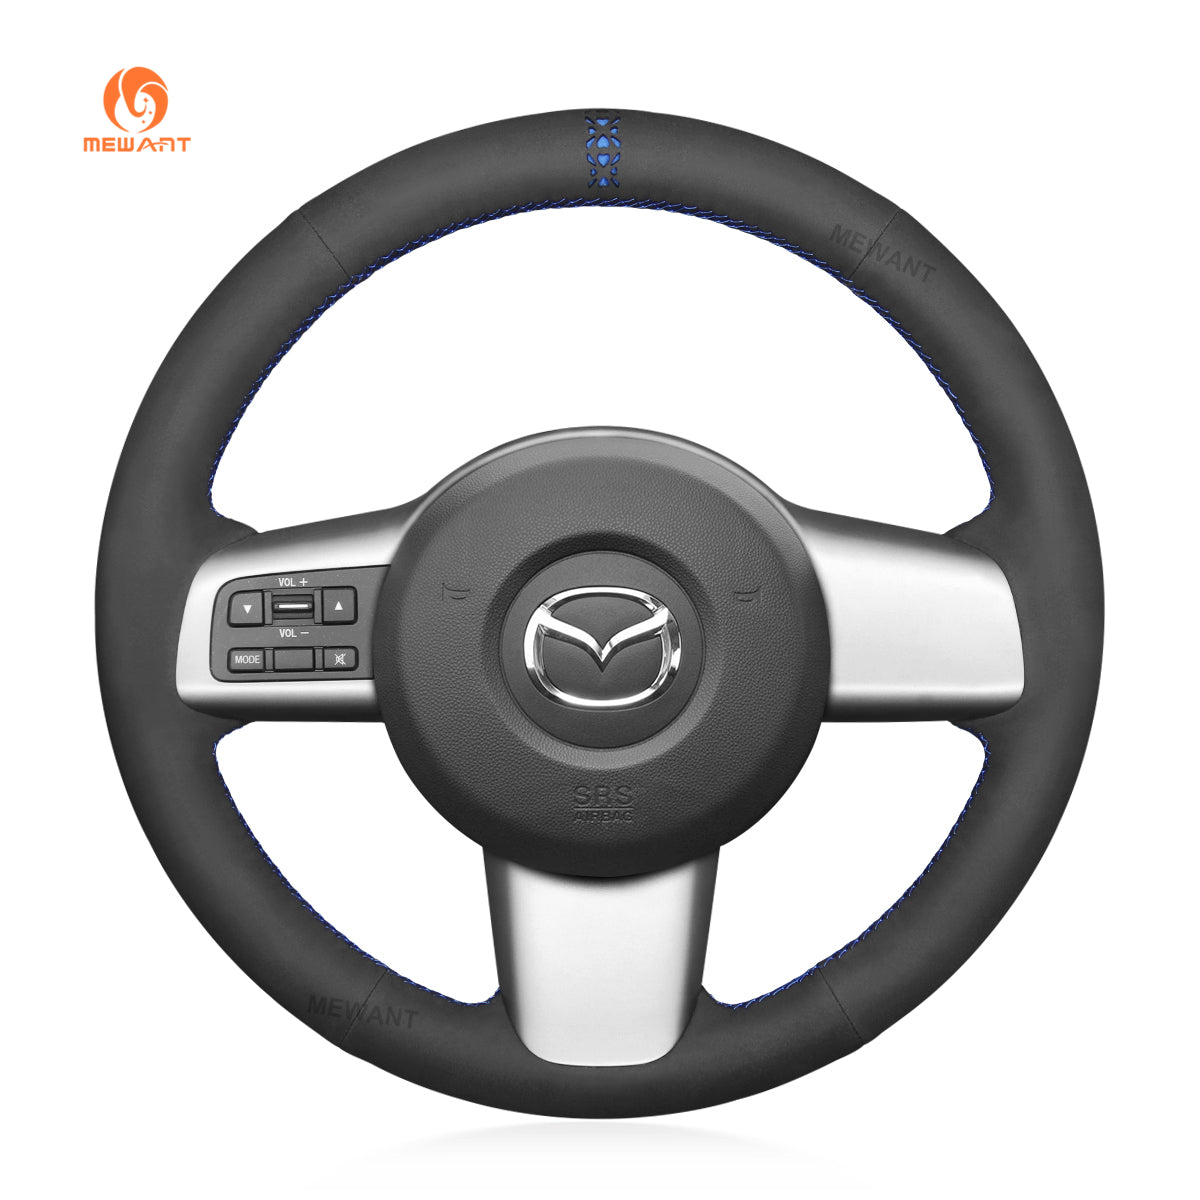 MEWANT Hand Stitch Car Steering Wheel Cover for Mazda 2 2008-2014